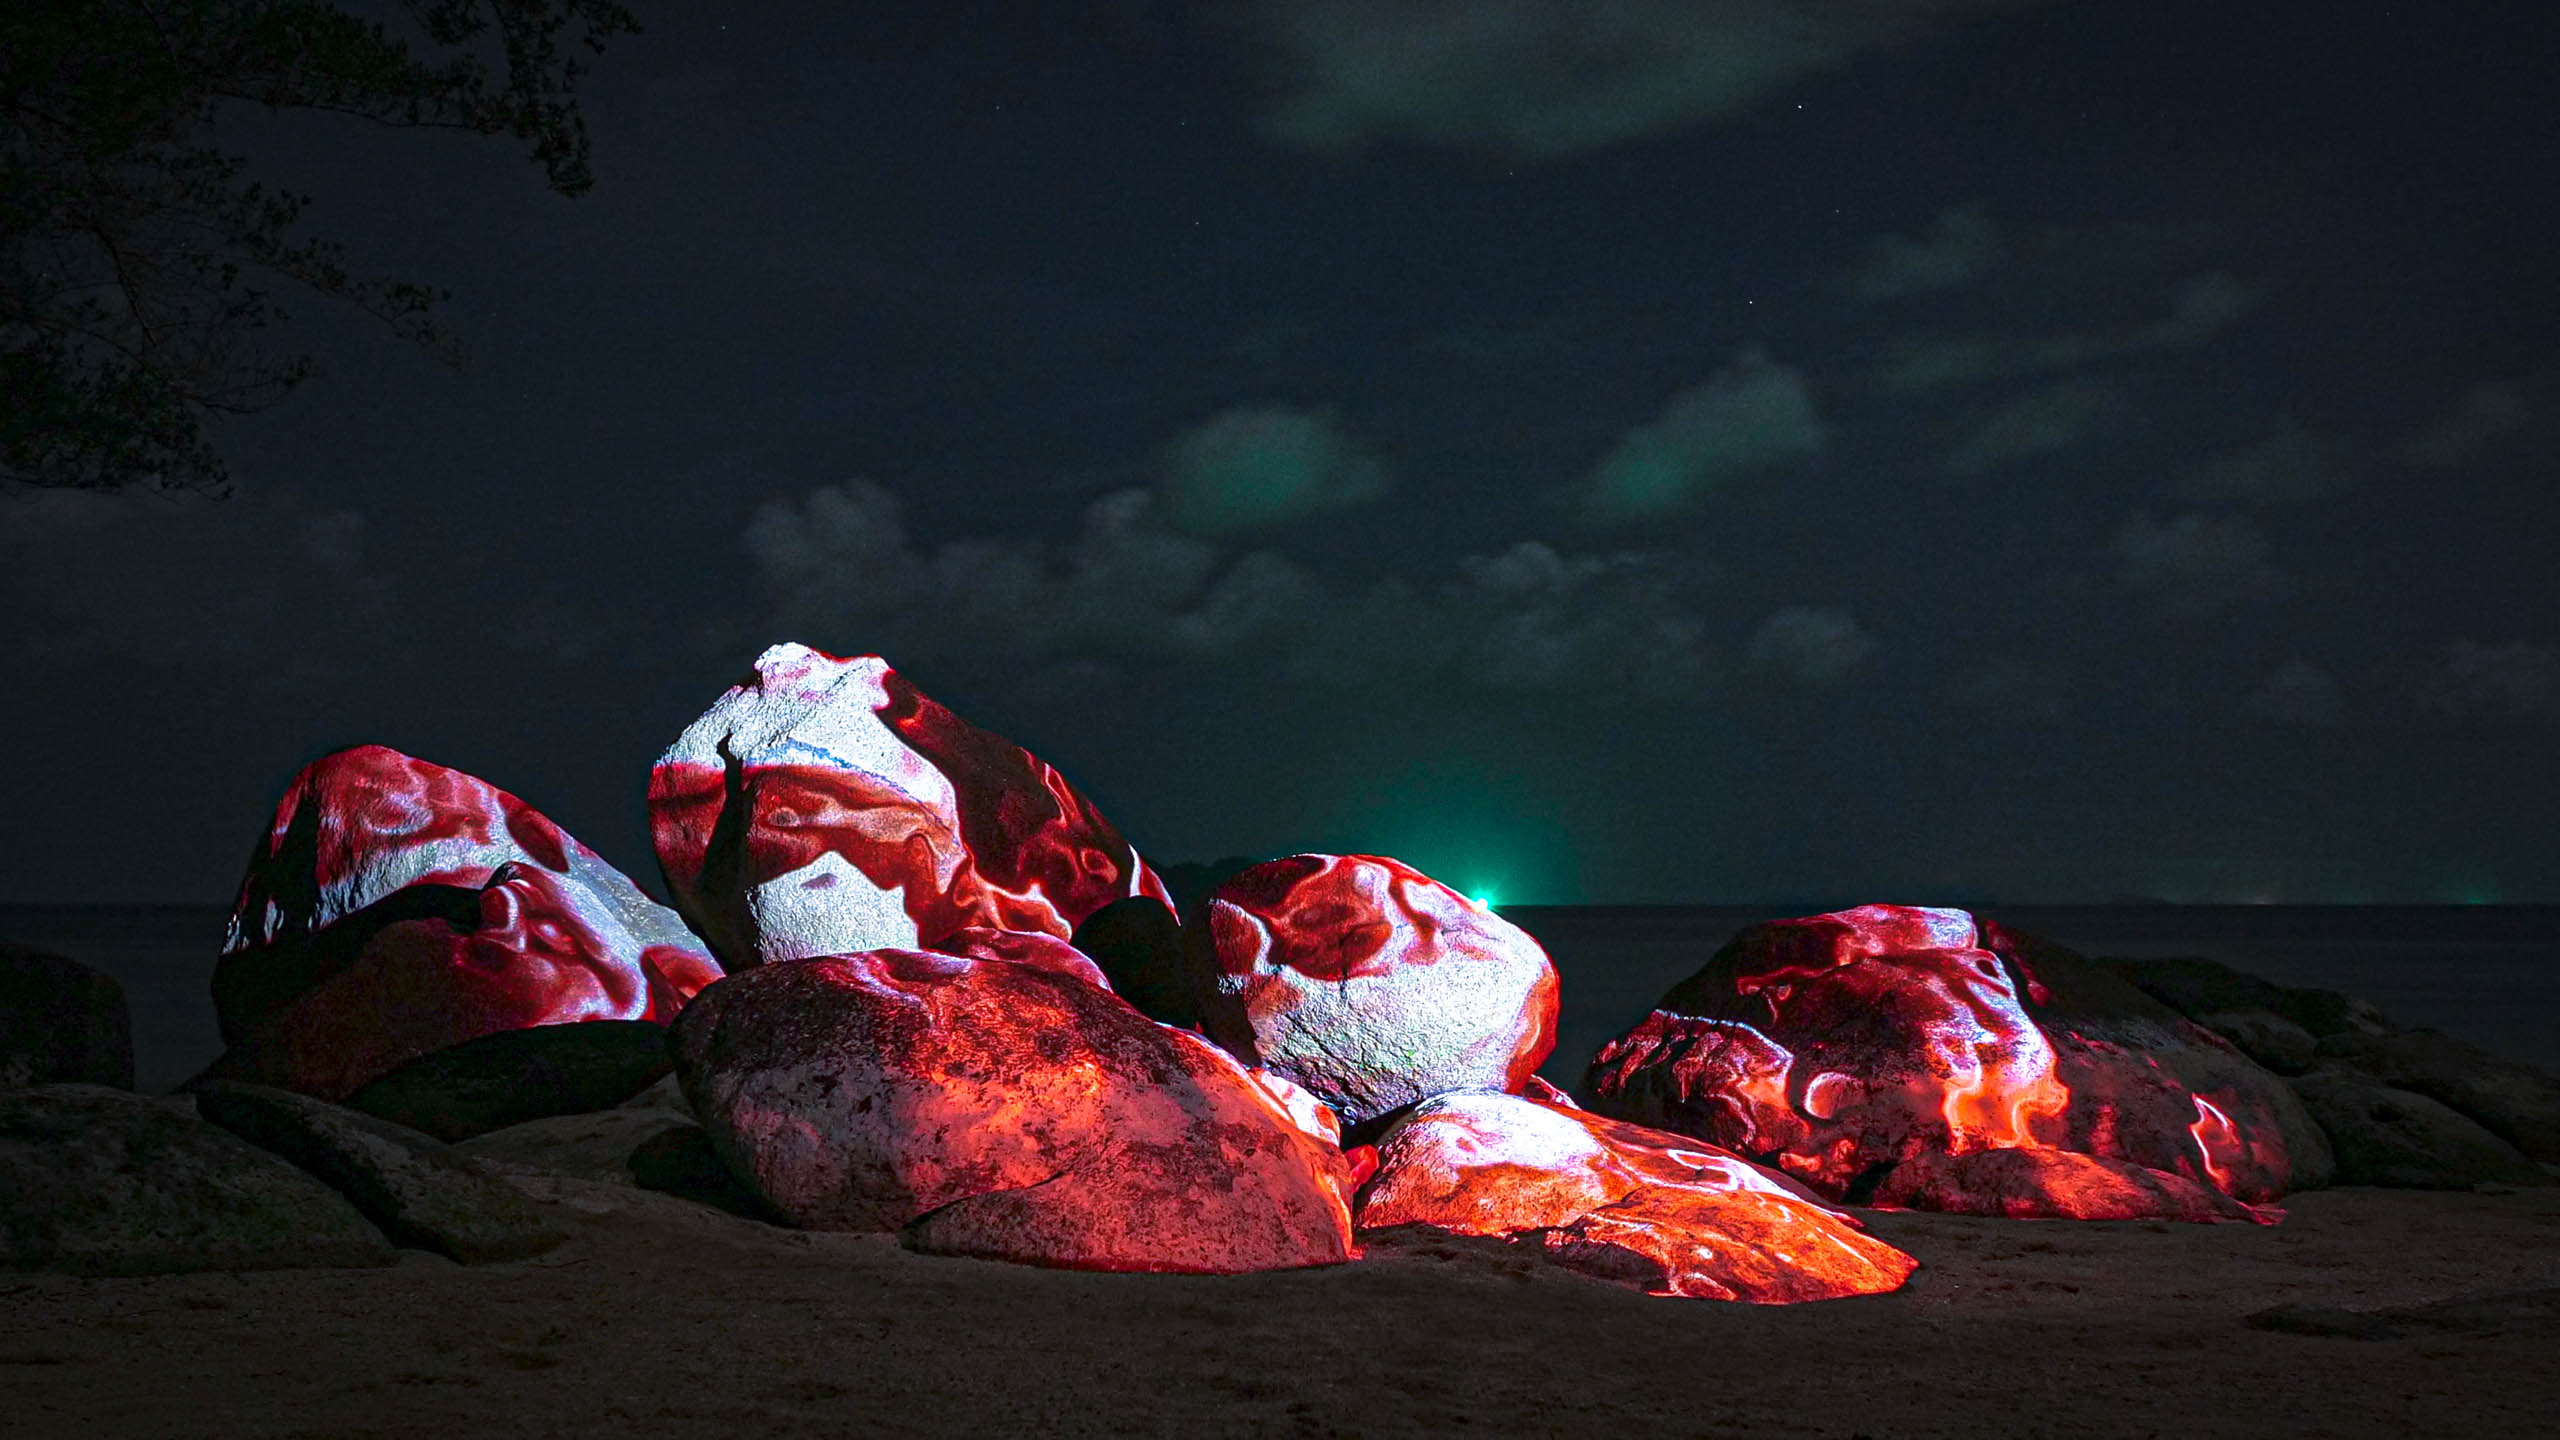 light art, 3d projection mapping with red colors, by philipp frank. Located on a rock at the beach